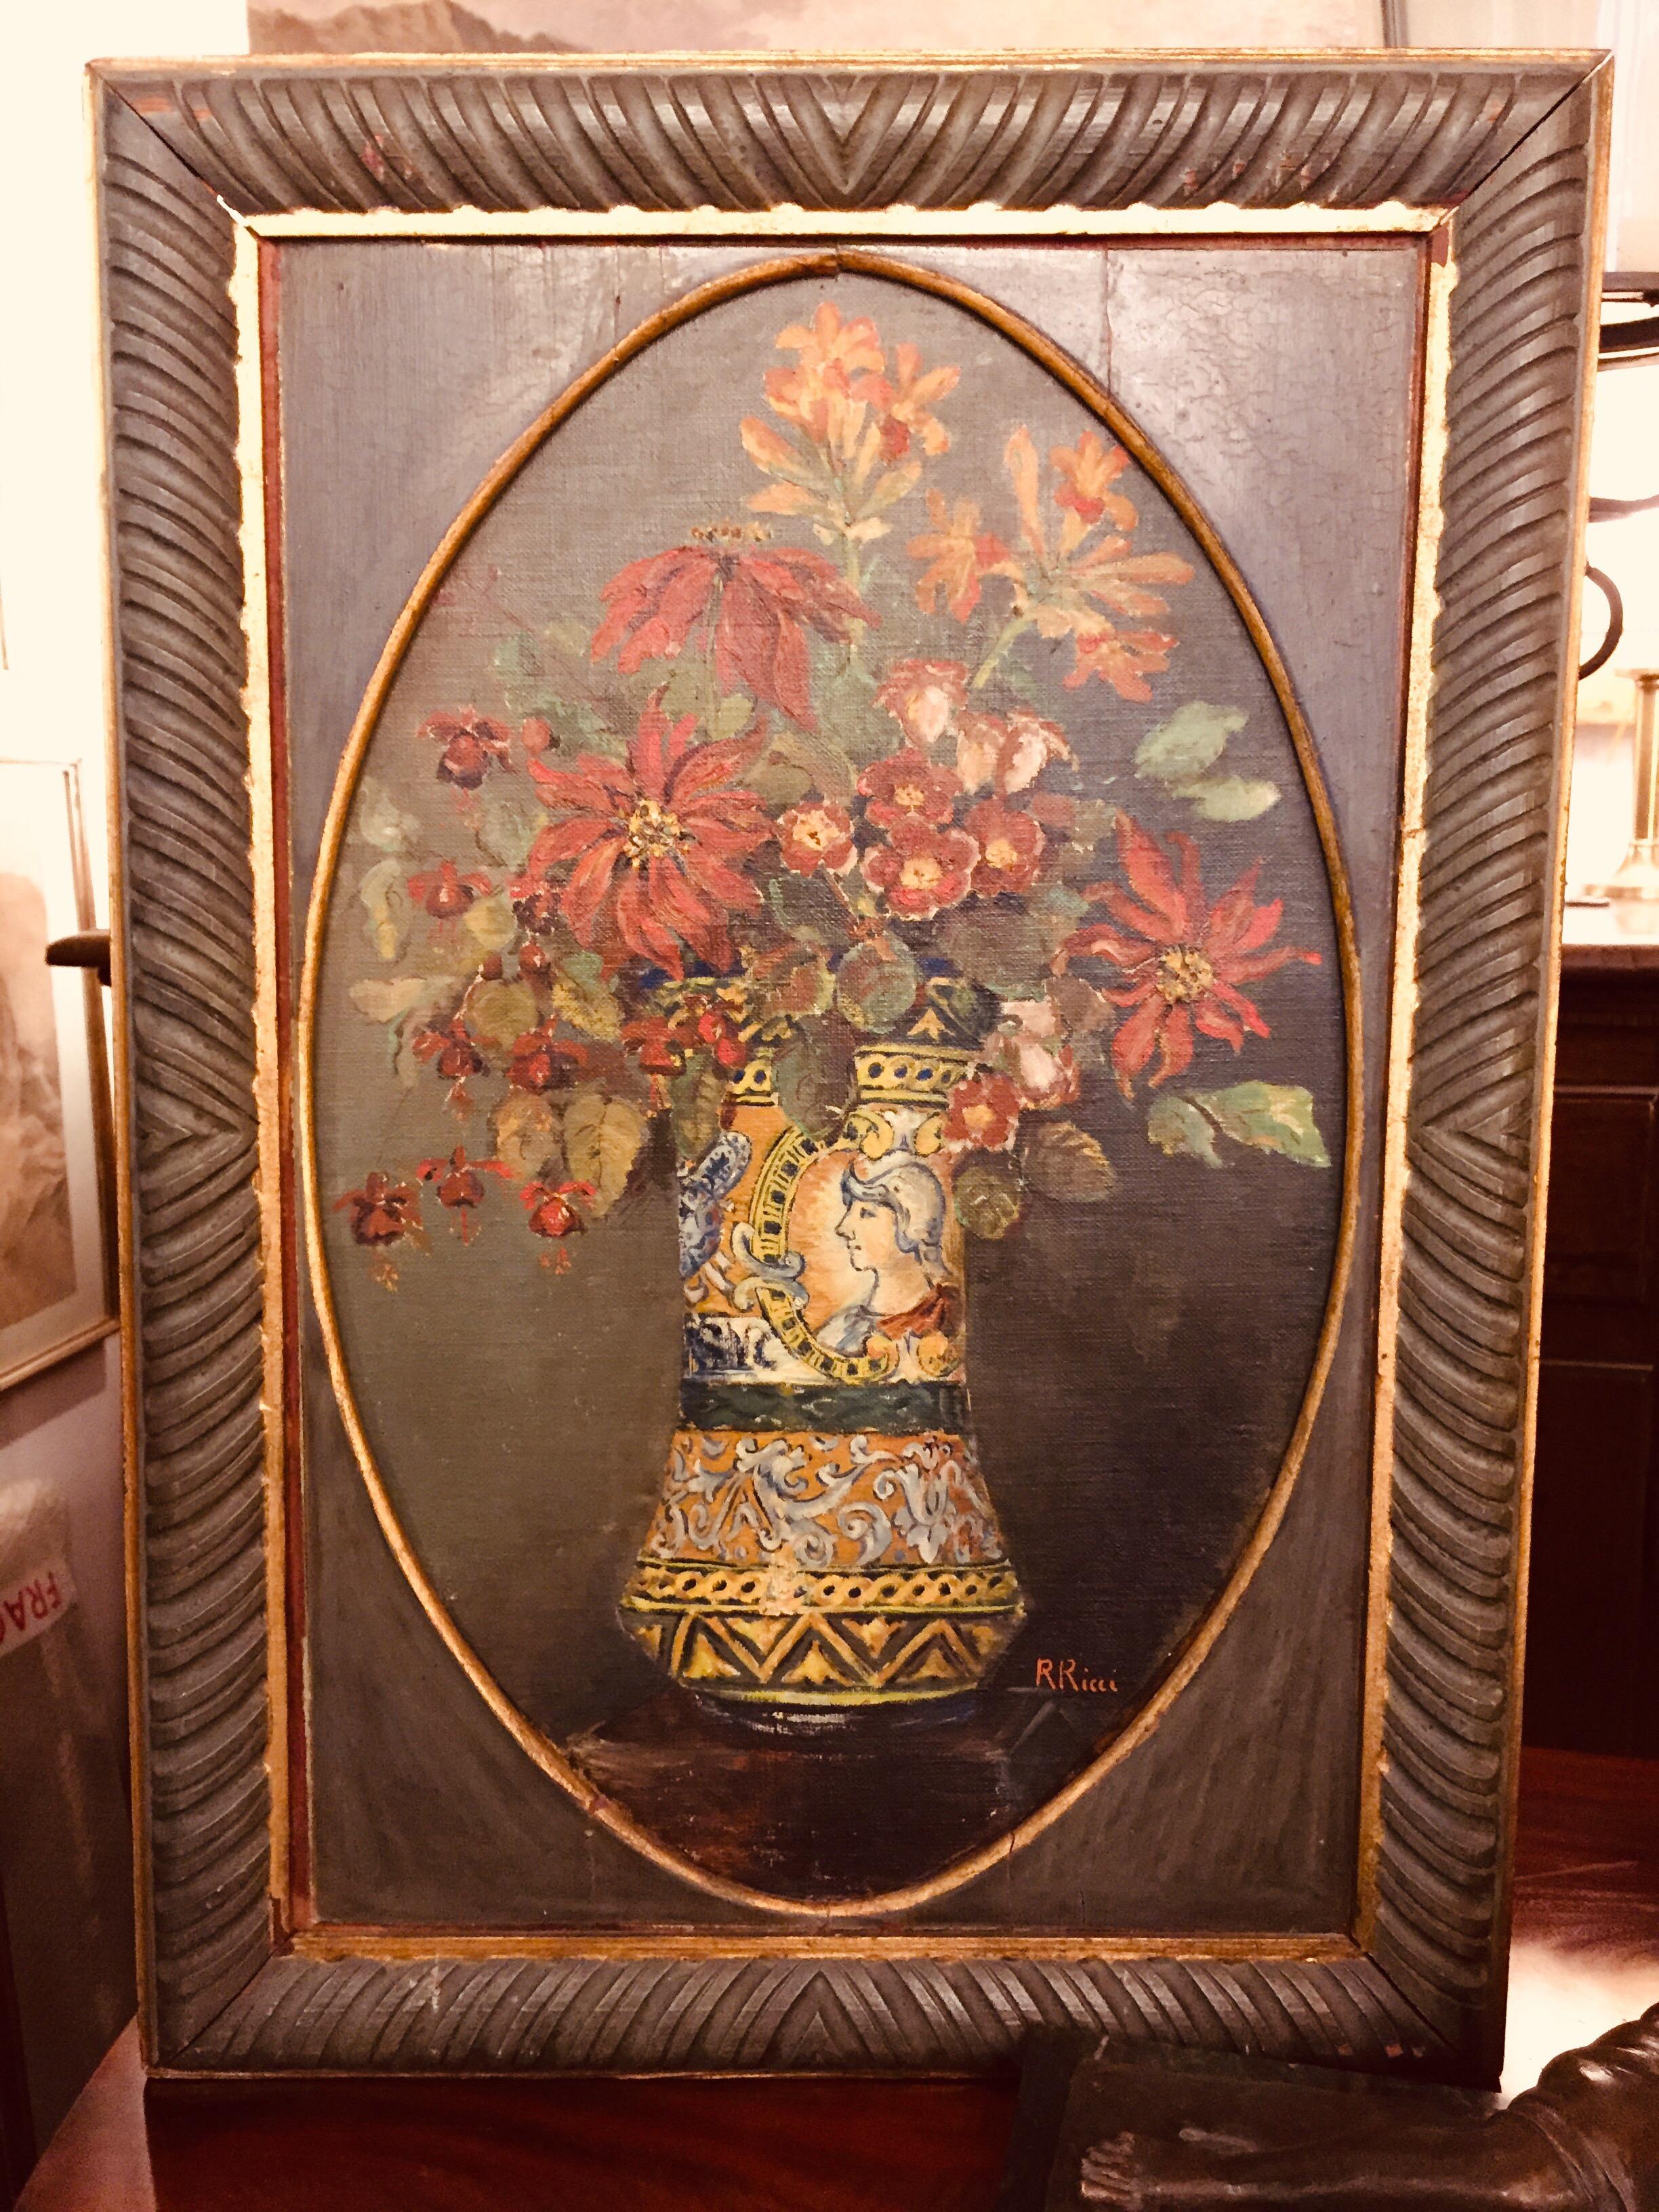 Pair of Italian Flower Still life Paintings by Ricci 20th Century Green Frames For Sale 5